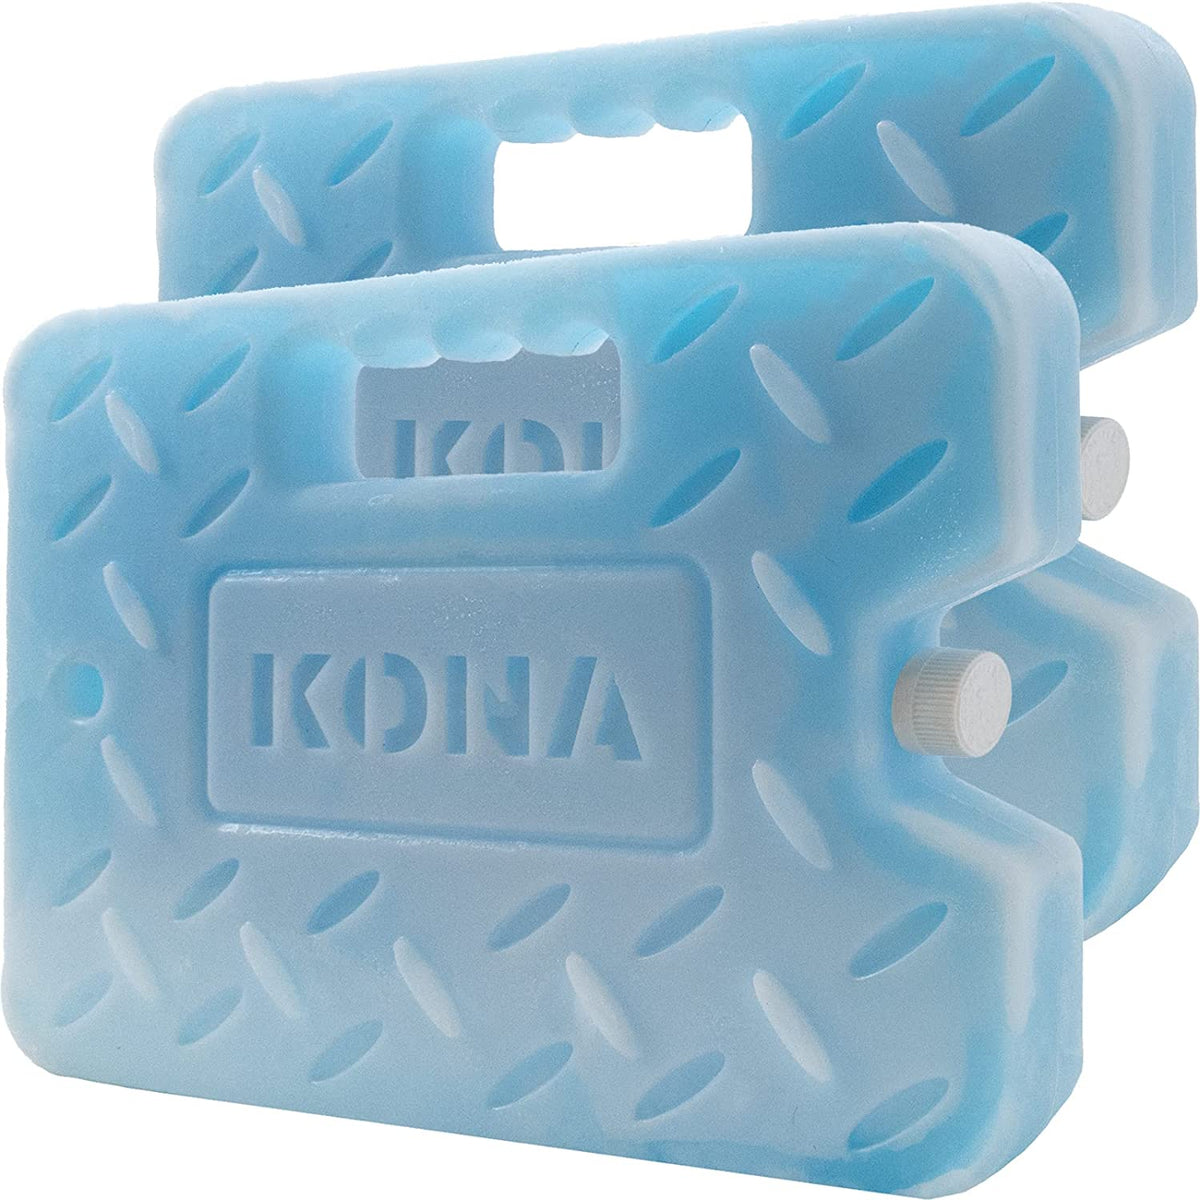 Kona Large Ice Pack for Coolers [Blue Ice 4lb] Extreme Long Lasting Design  Absorbs Heat to Cool Faster - Refreezable. Reusable. Colder Than Ice (-5C)